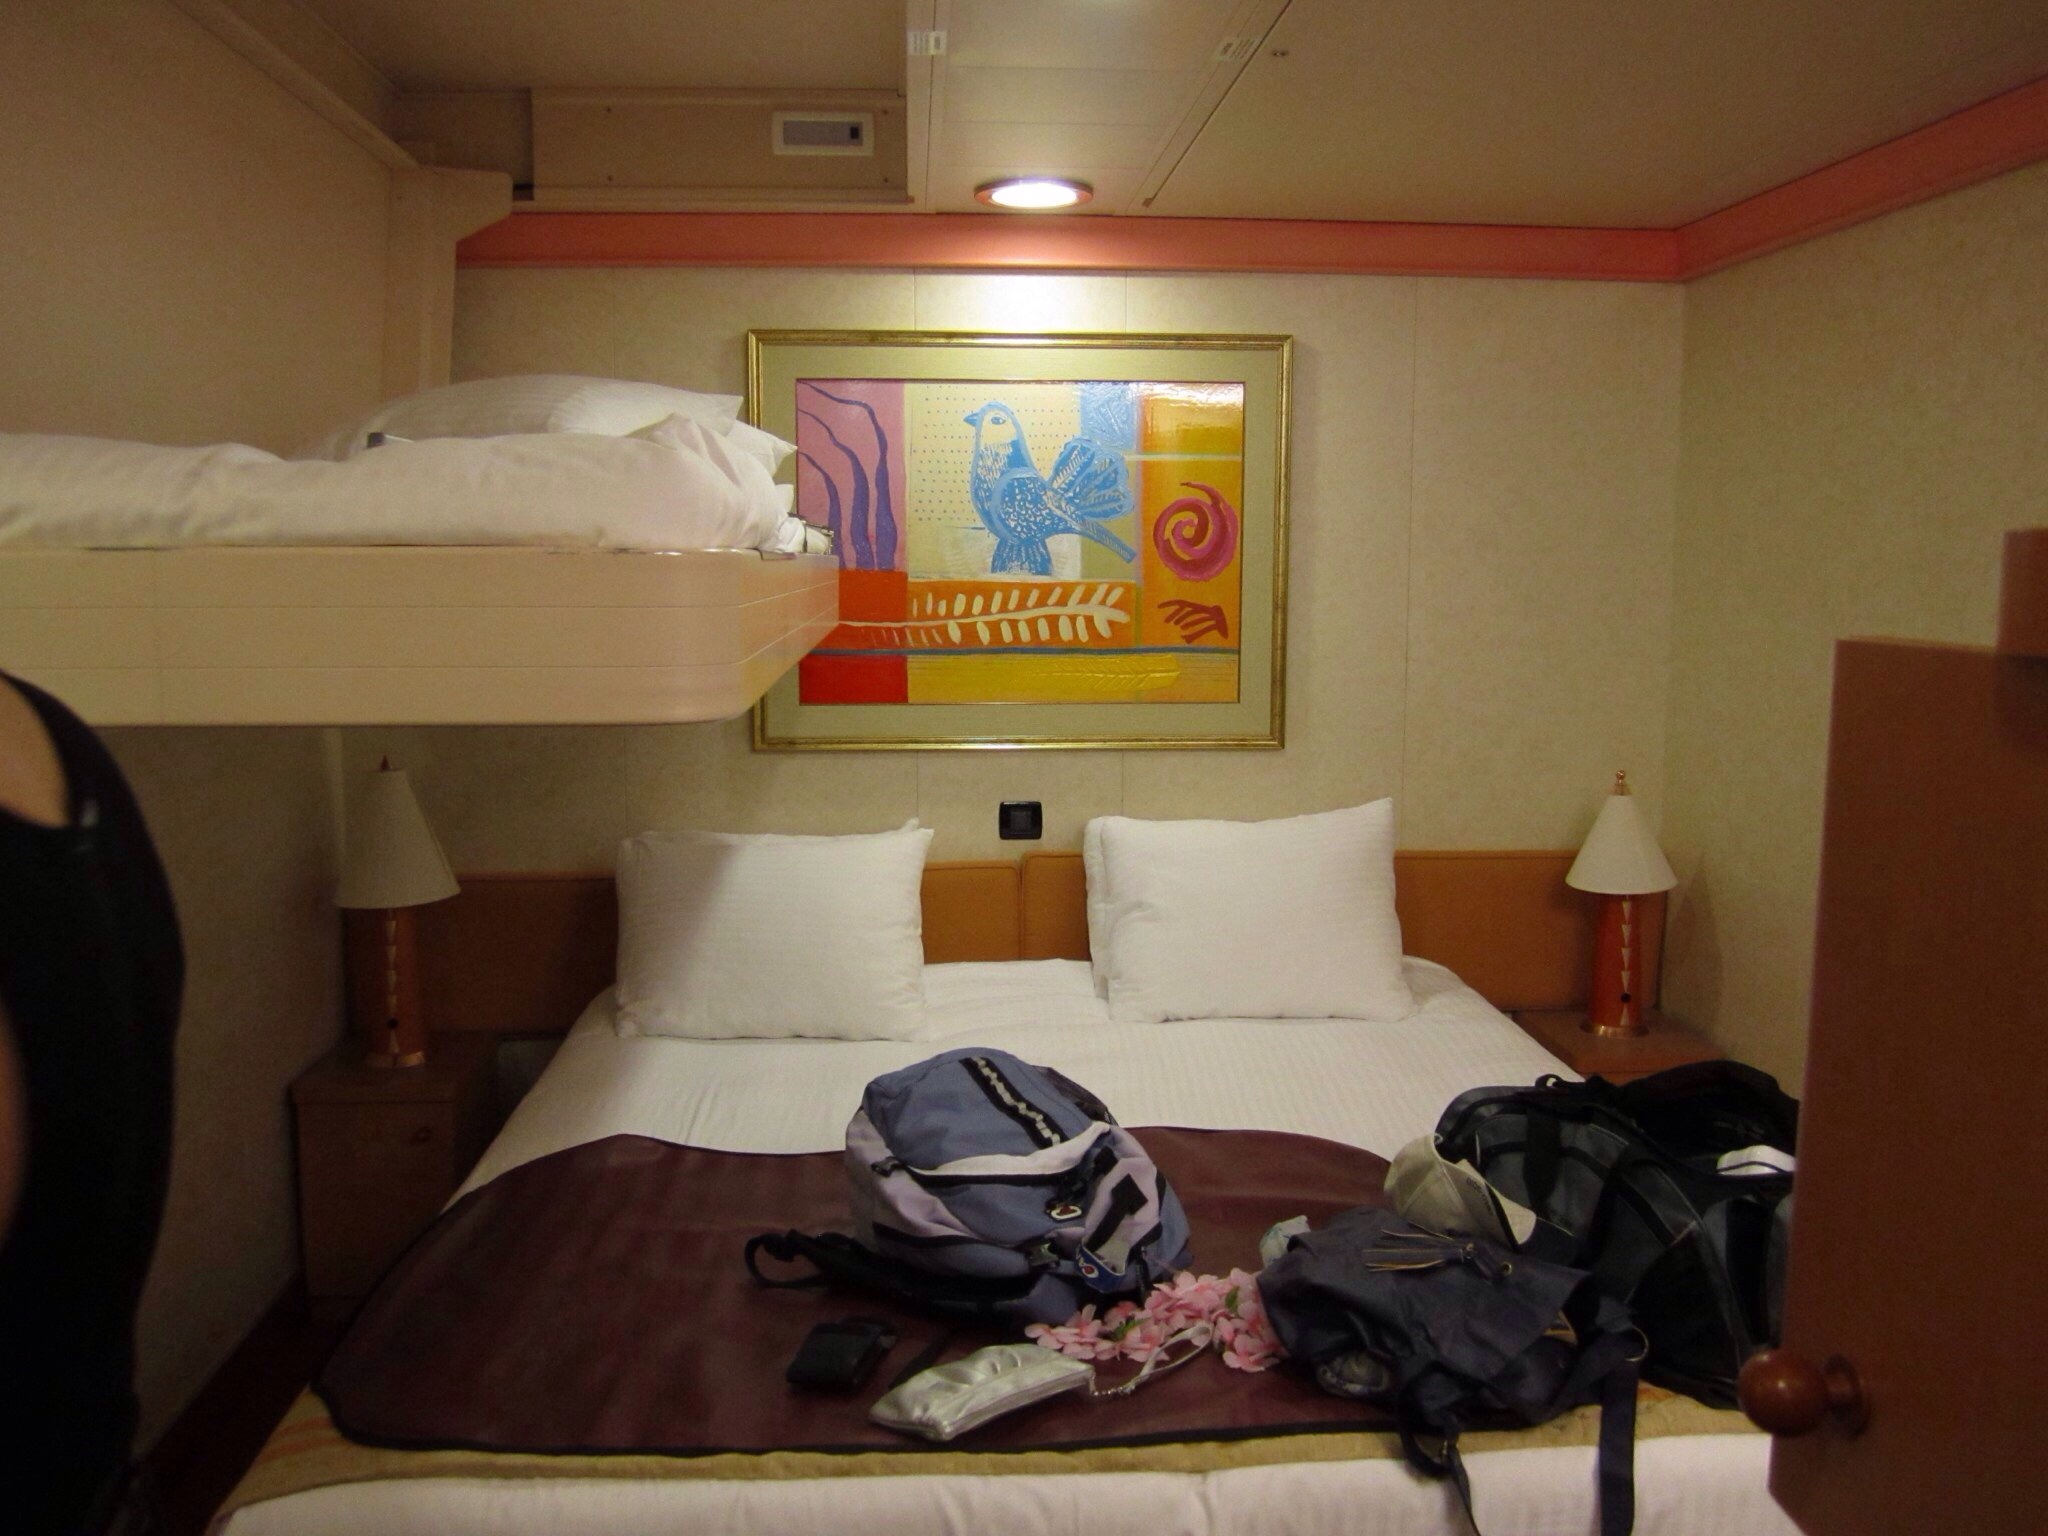 Interior Stateroom Cabin Category 4a Carnival Glory